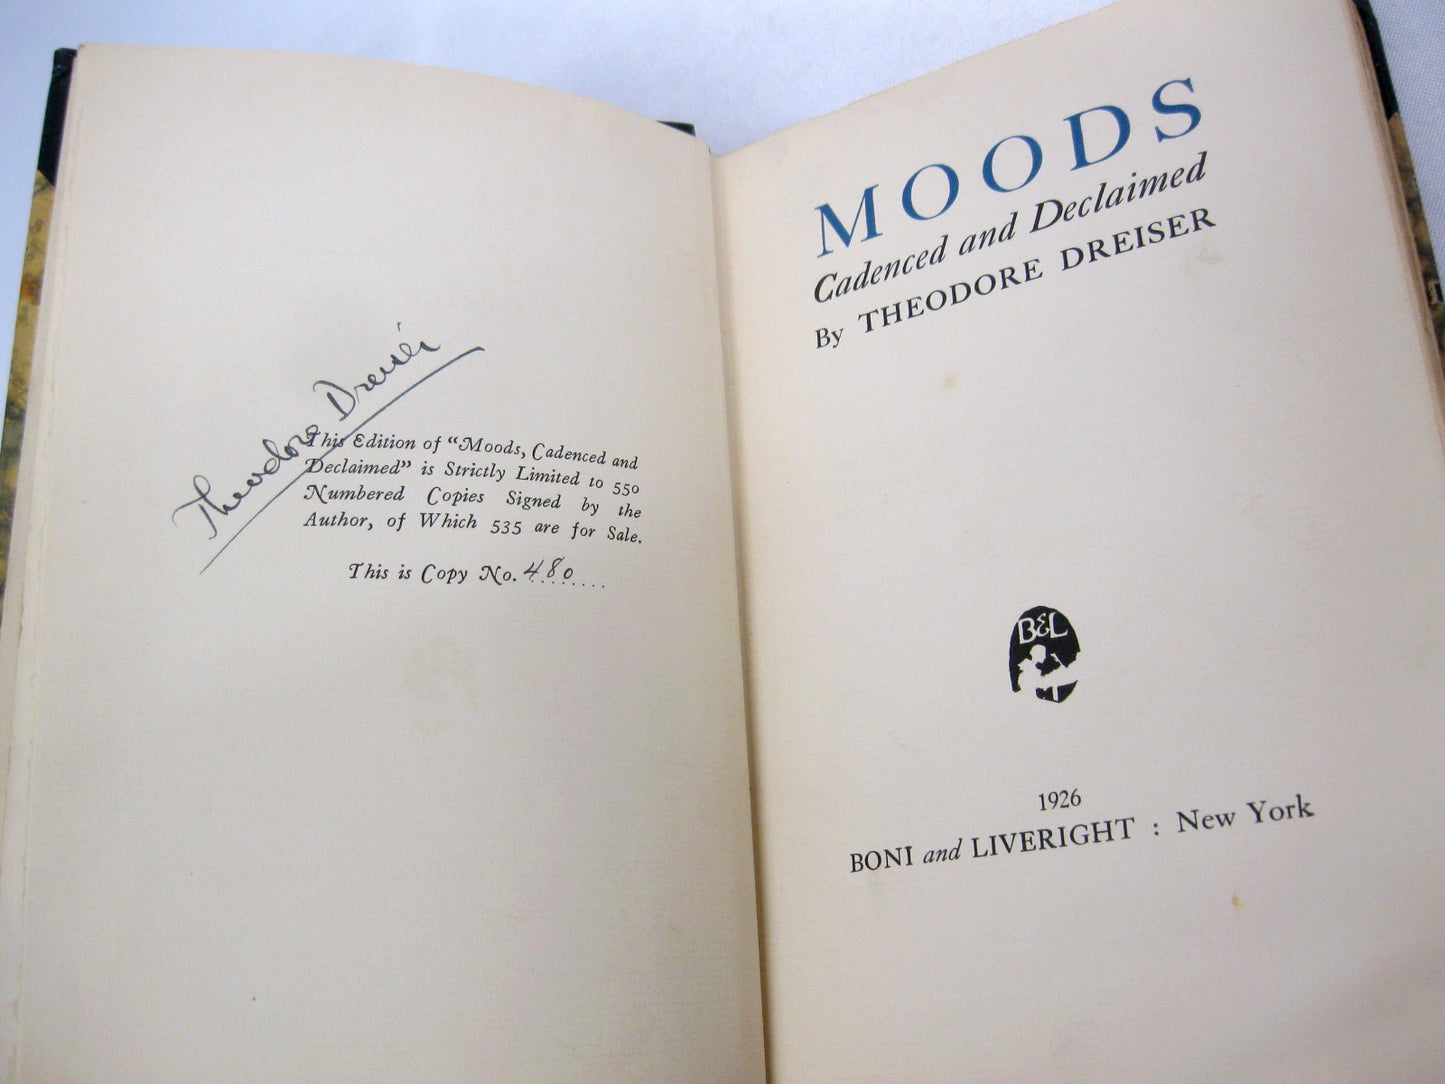 Moods: Cadenced and Declaimed by Theodore Dreiser